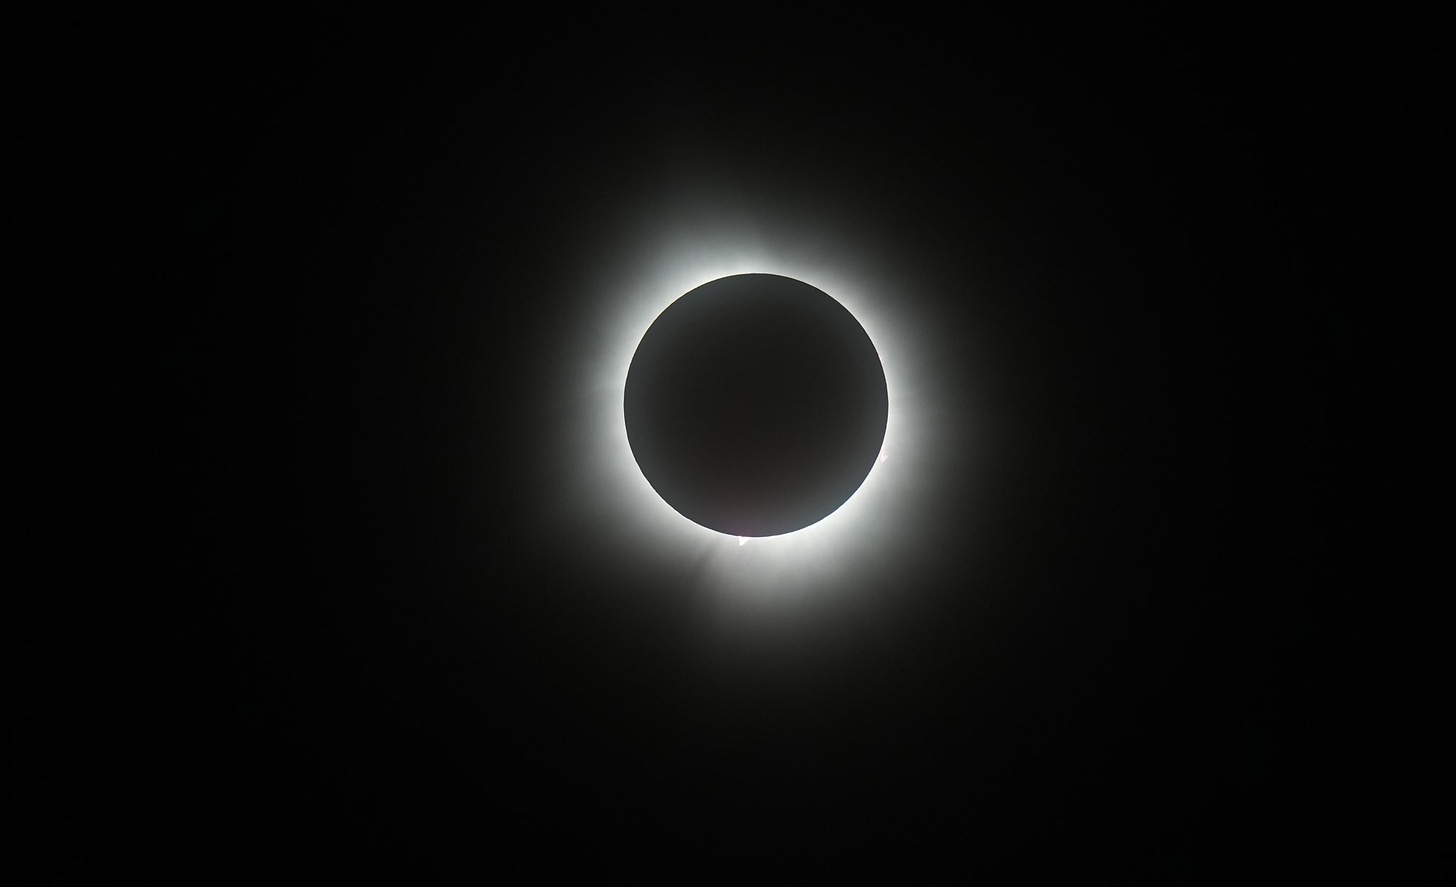 Armstrong Air & Space Museum on X: "View of the total #SolarEclipse from  the Armstrong Air & Space Museum in Wapakoneta, OH. Truly amazing! ⚫️  https://t.co/v5bMXceYPv" / X